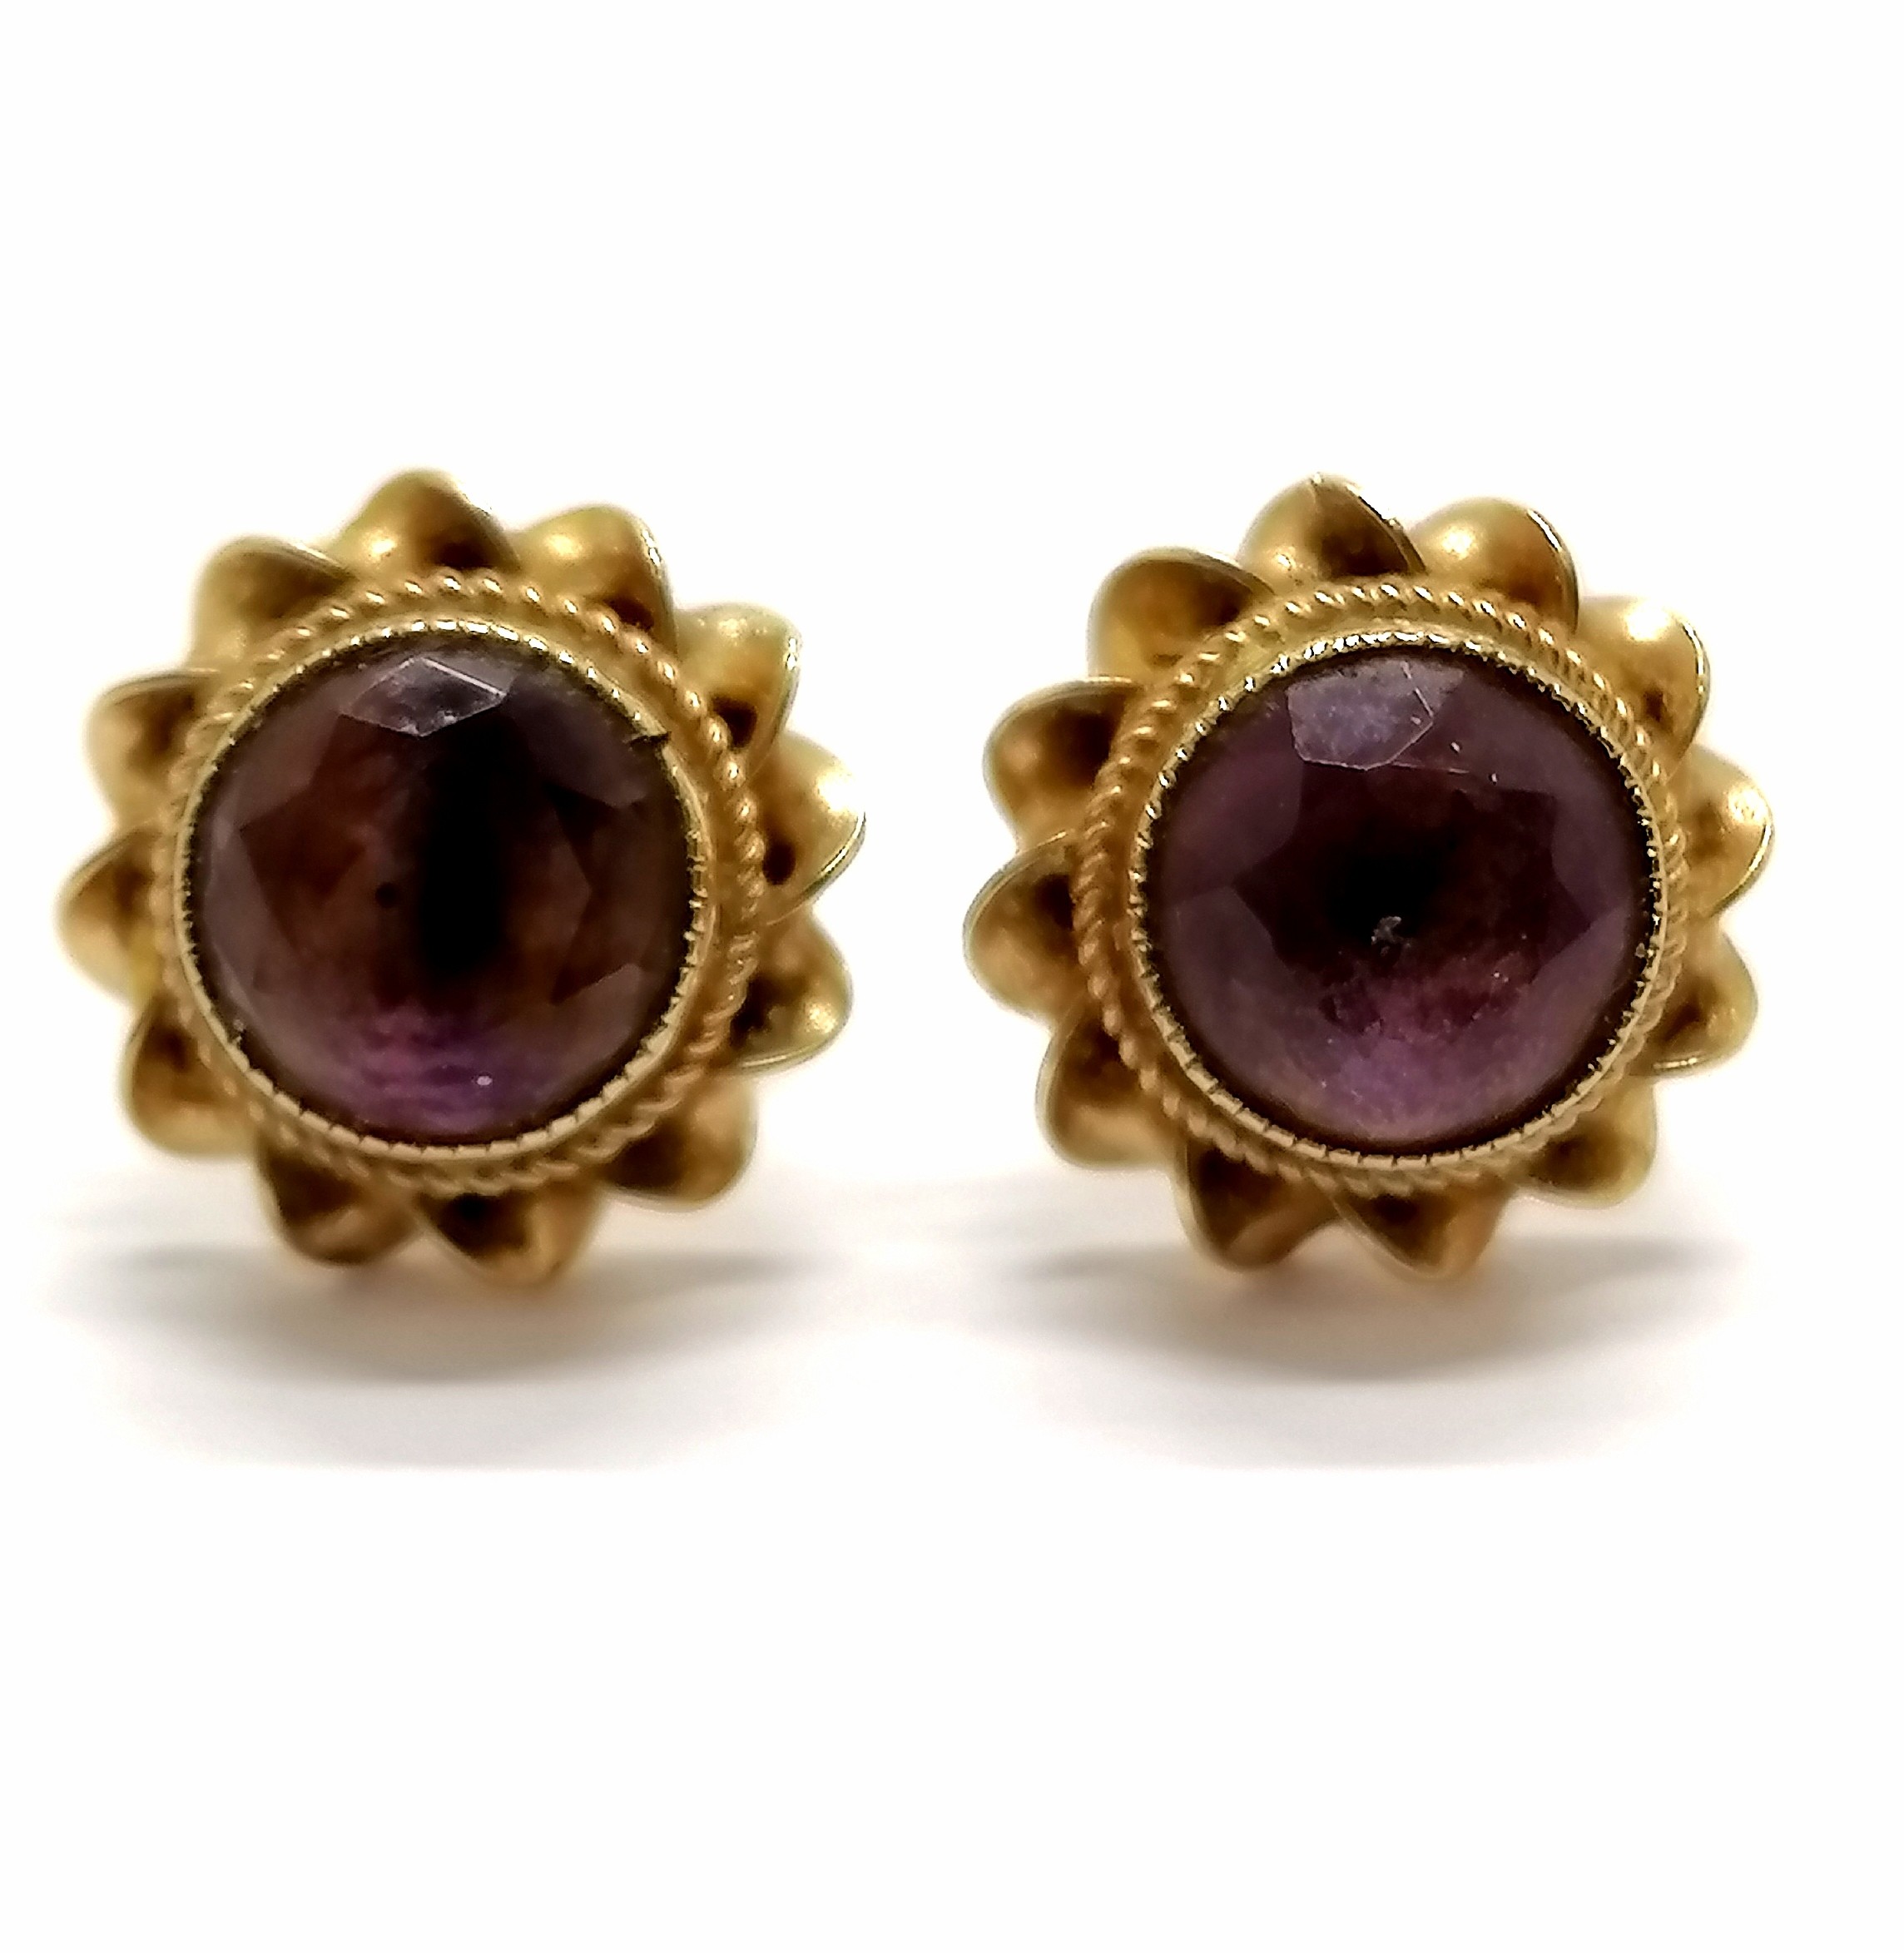 Pair of 9ct hallmarked gold amethyst stone set earrings - 2.2g total weight - SOLD ON BEHALF OF